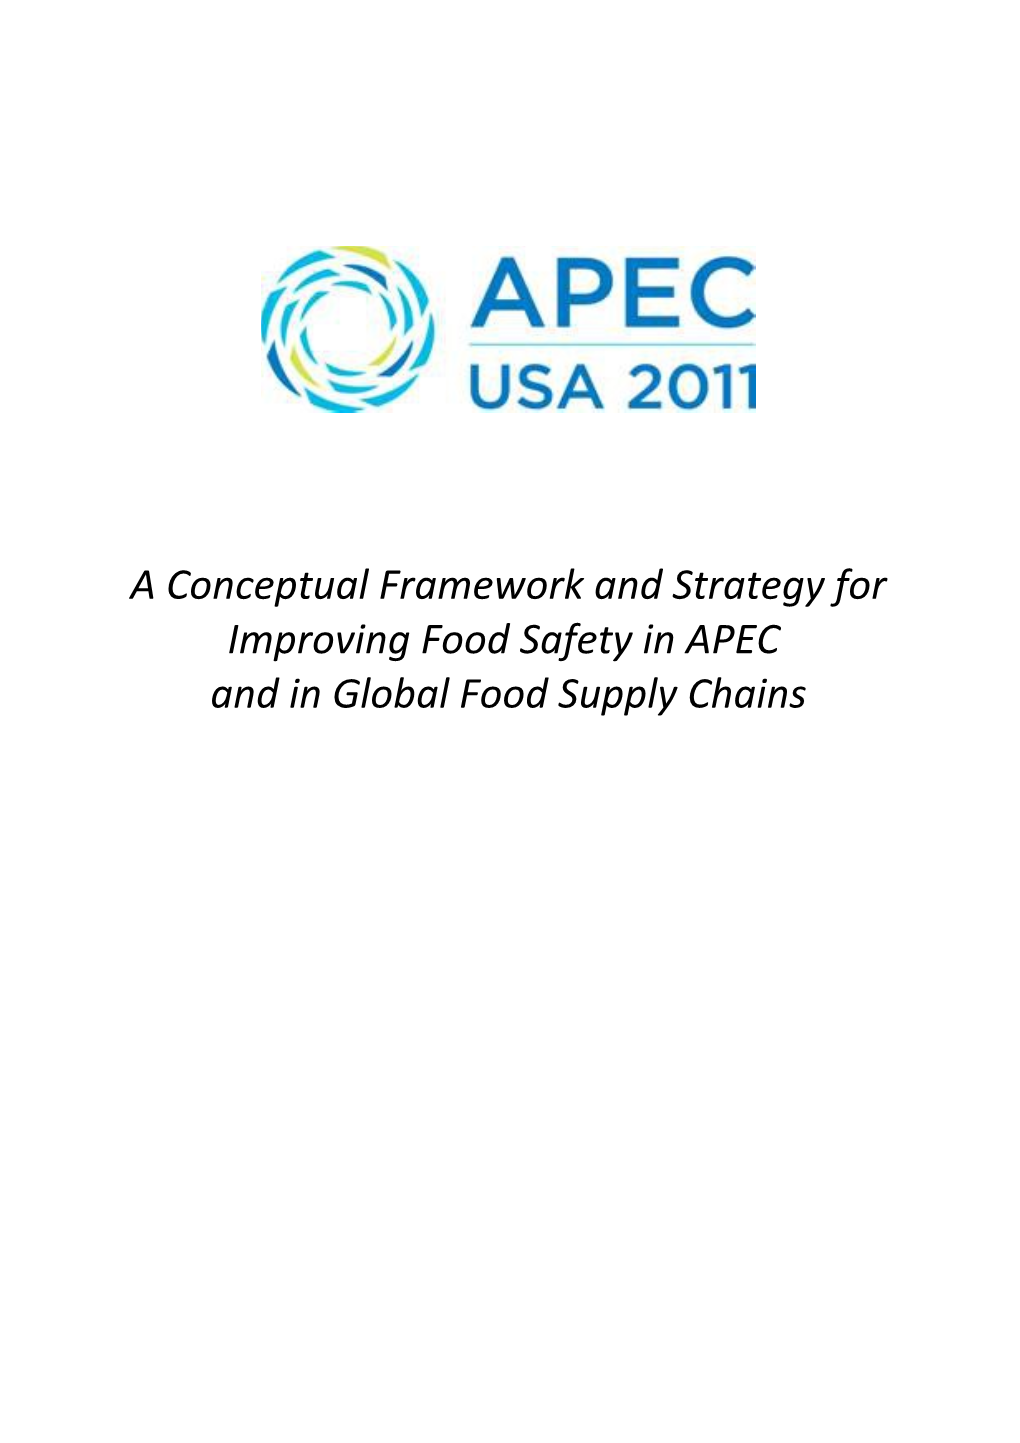 A Conceptual Framework and Strategy for Improving Food Safety in APEC